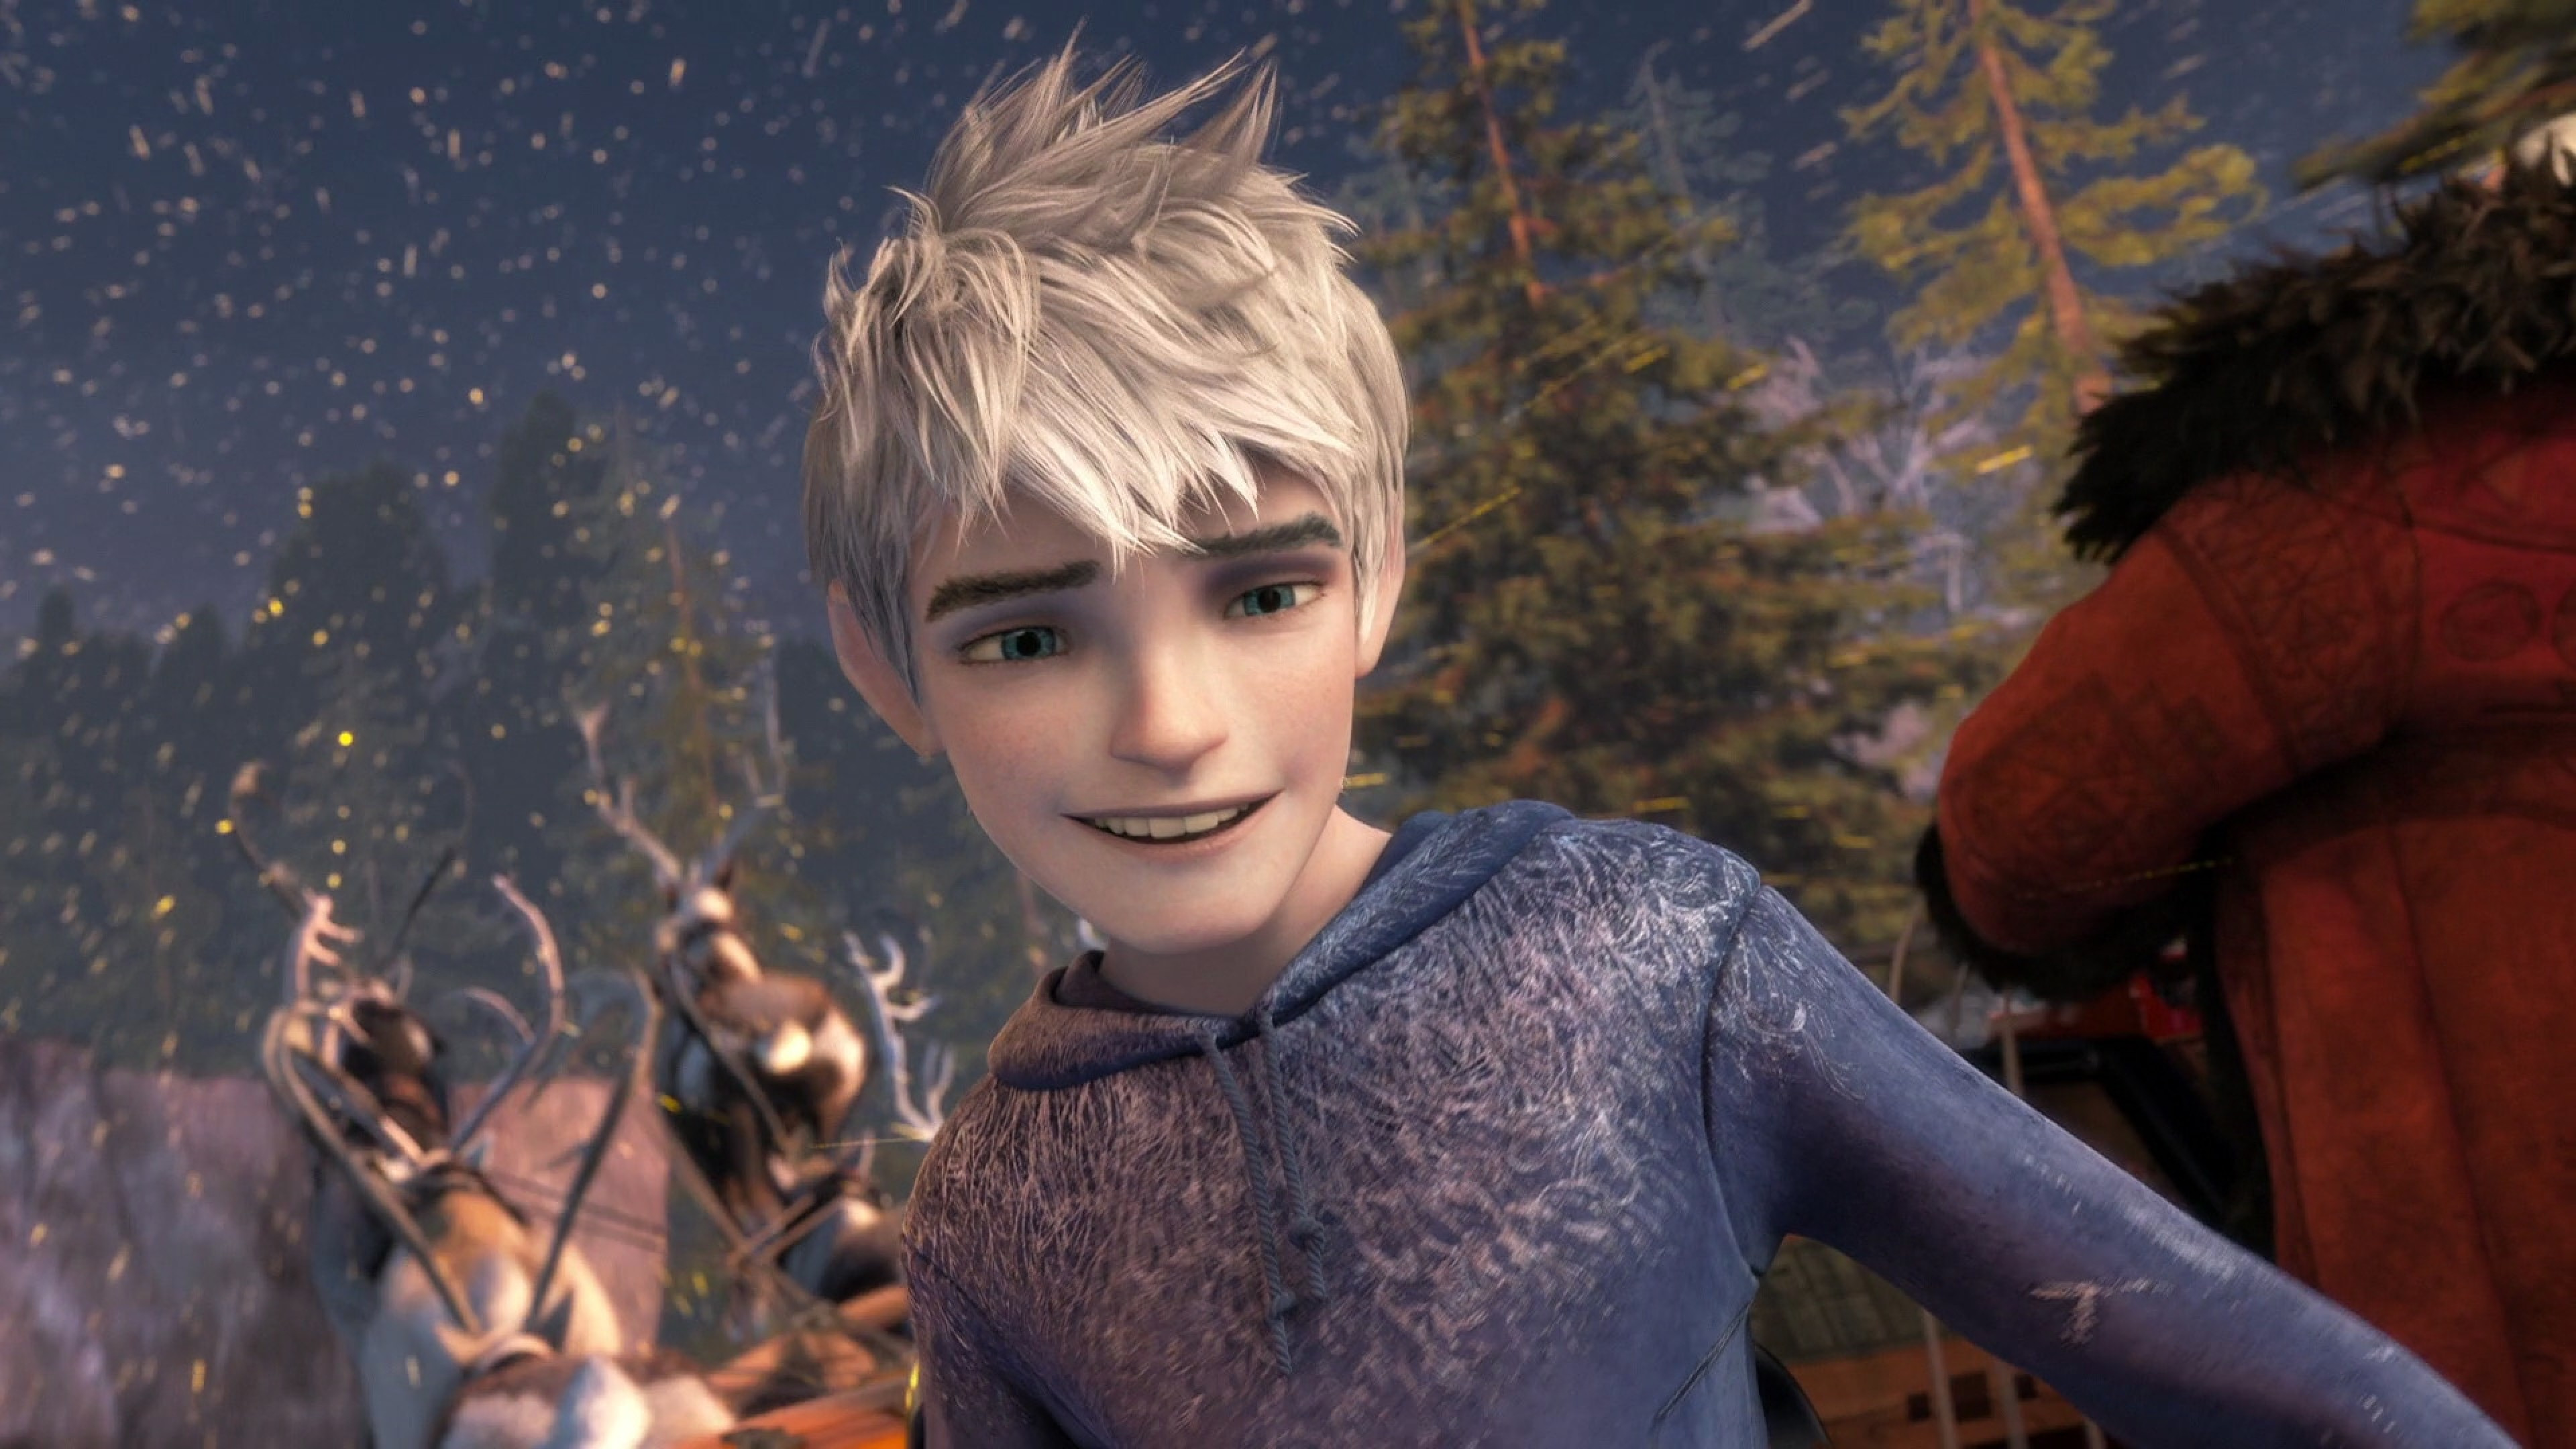 Download 3840x2160 Jack Frost, Rise Of The Guardians, Smiling, Snow, Animation Wallpaper for UHD TV